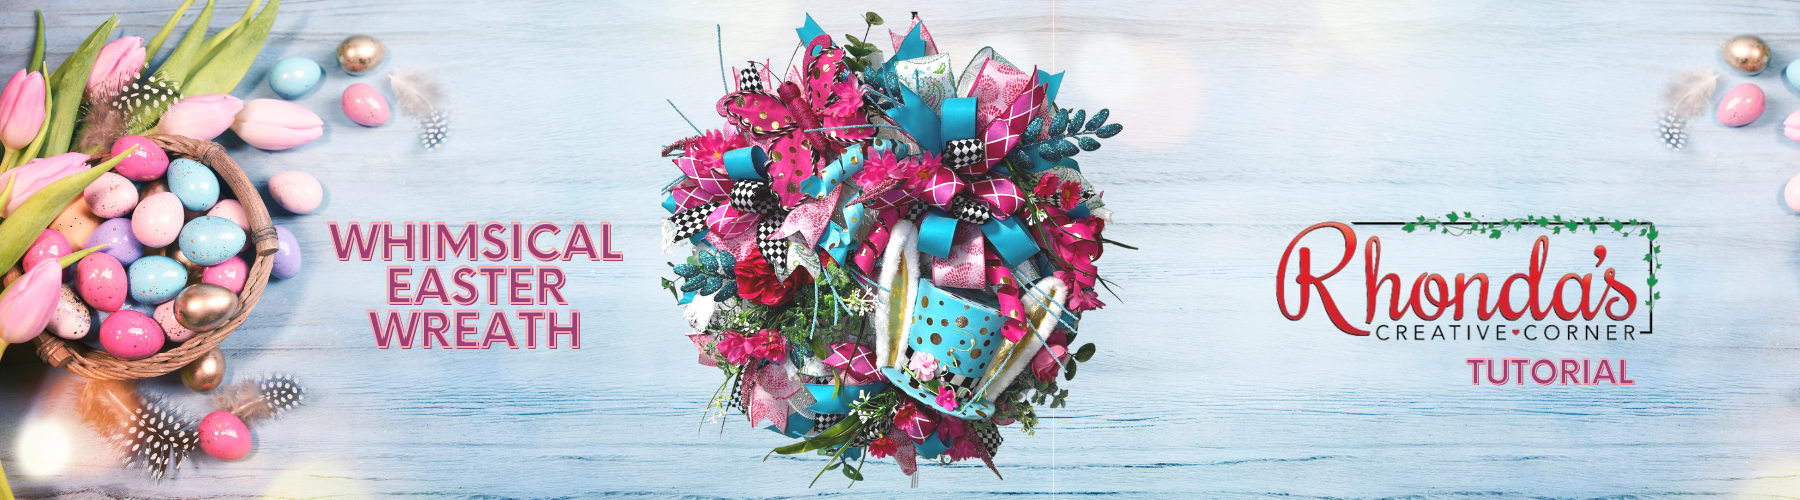 whimsical easter wreath with blue polka dot top hat